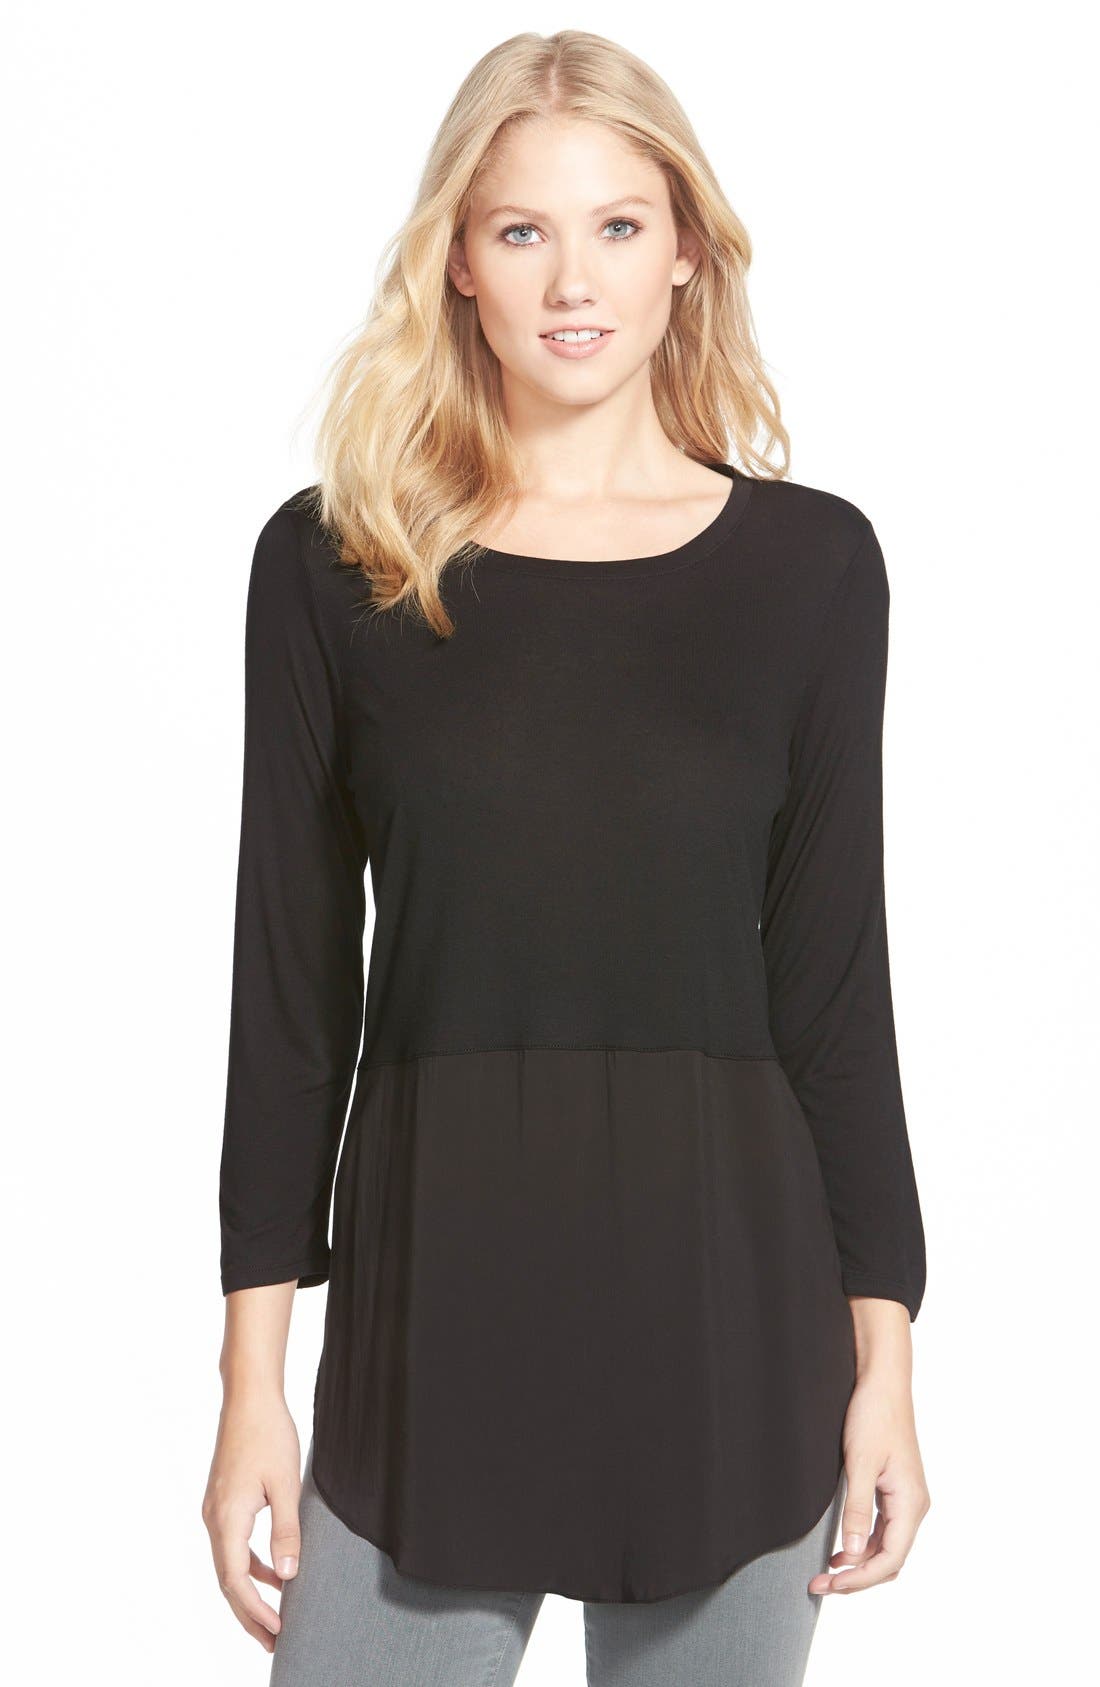 UPC 039372288655 product image for Women's Two By Vince Camuto Mixed Media Jewel Neck Tunic, Size Medium - Black | upcitemdb.com